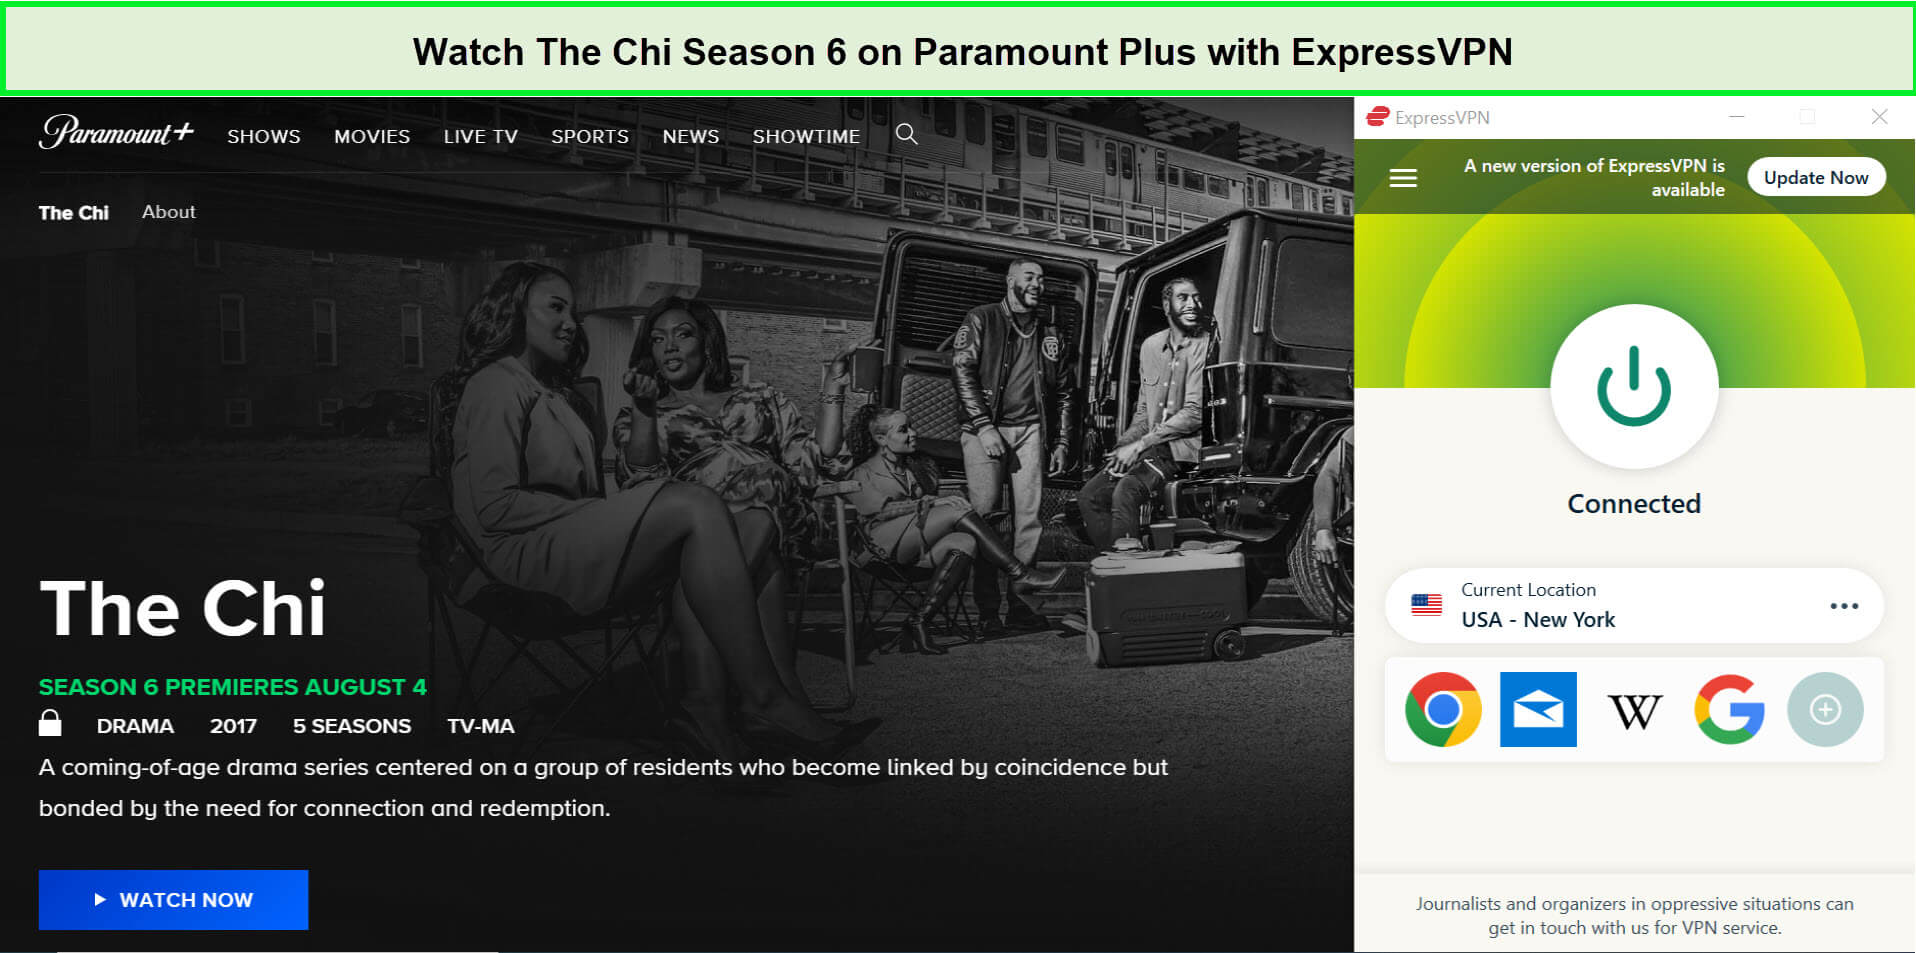 Watch-The-Chi-Season-6-in-South Korea-on-Paramount-Plus-with-ExpressVPN